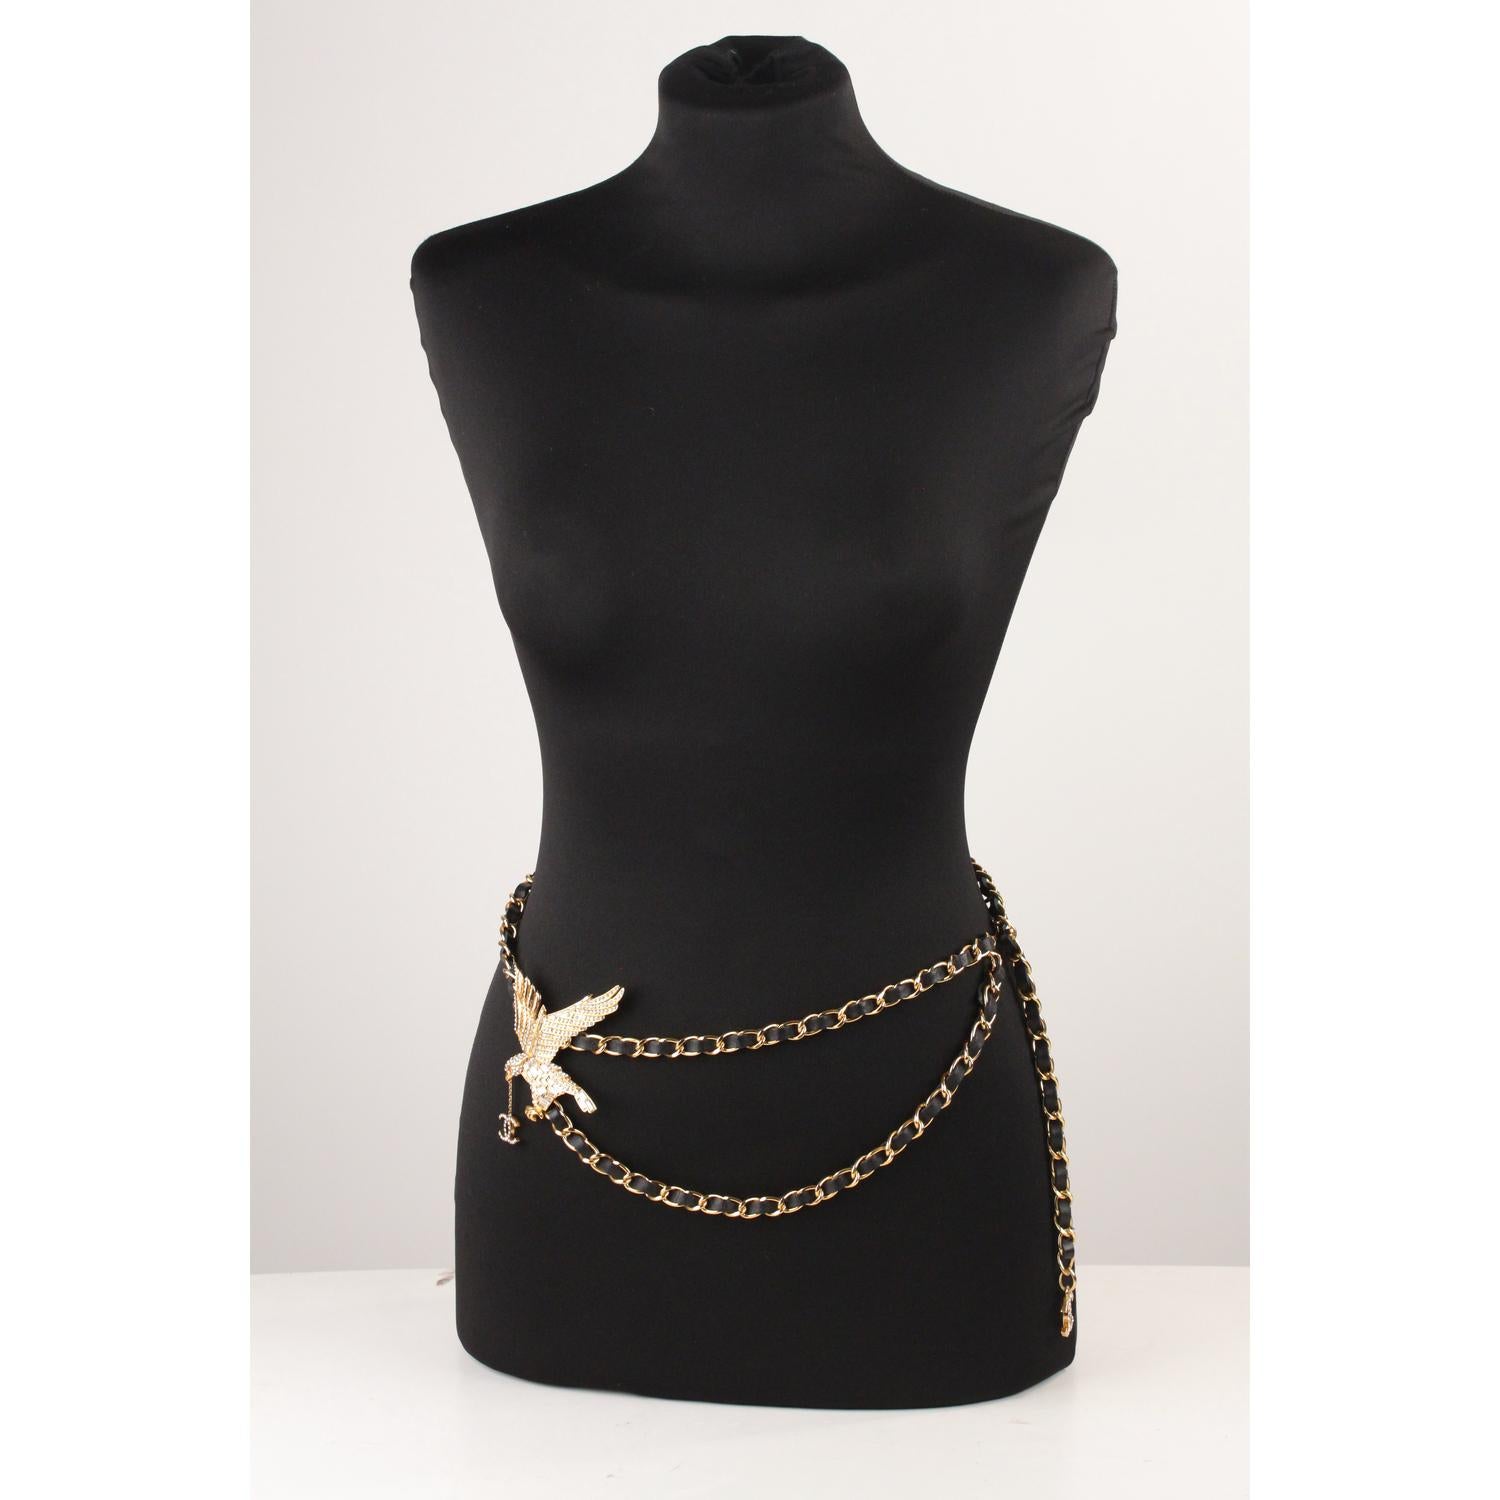 Chanel Gold Metal Chain Eagle Necklace or Belt with Rhinestones 1